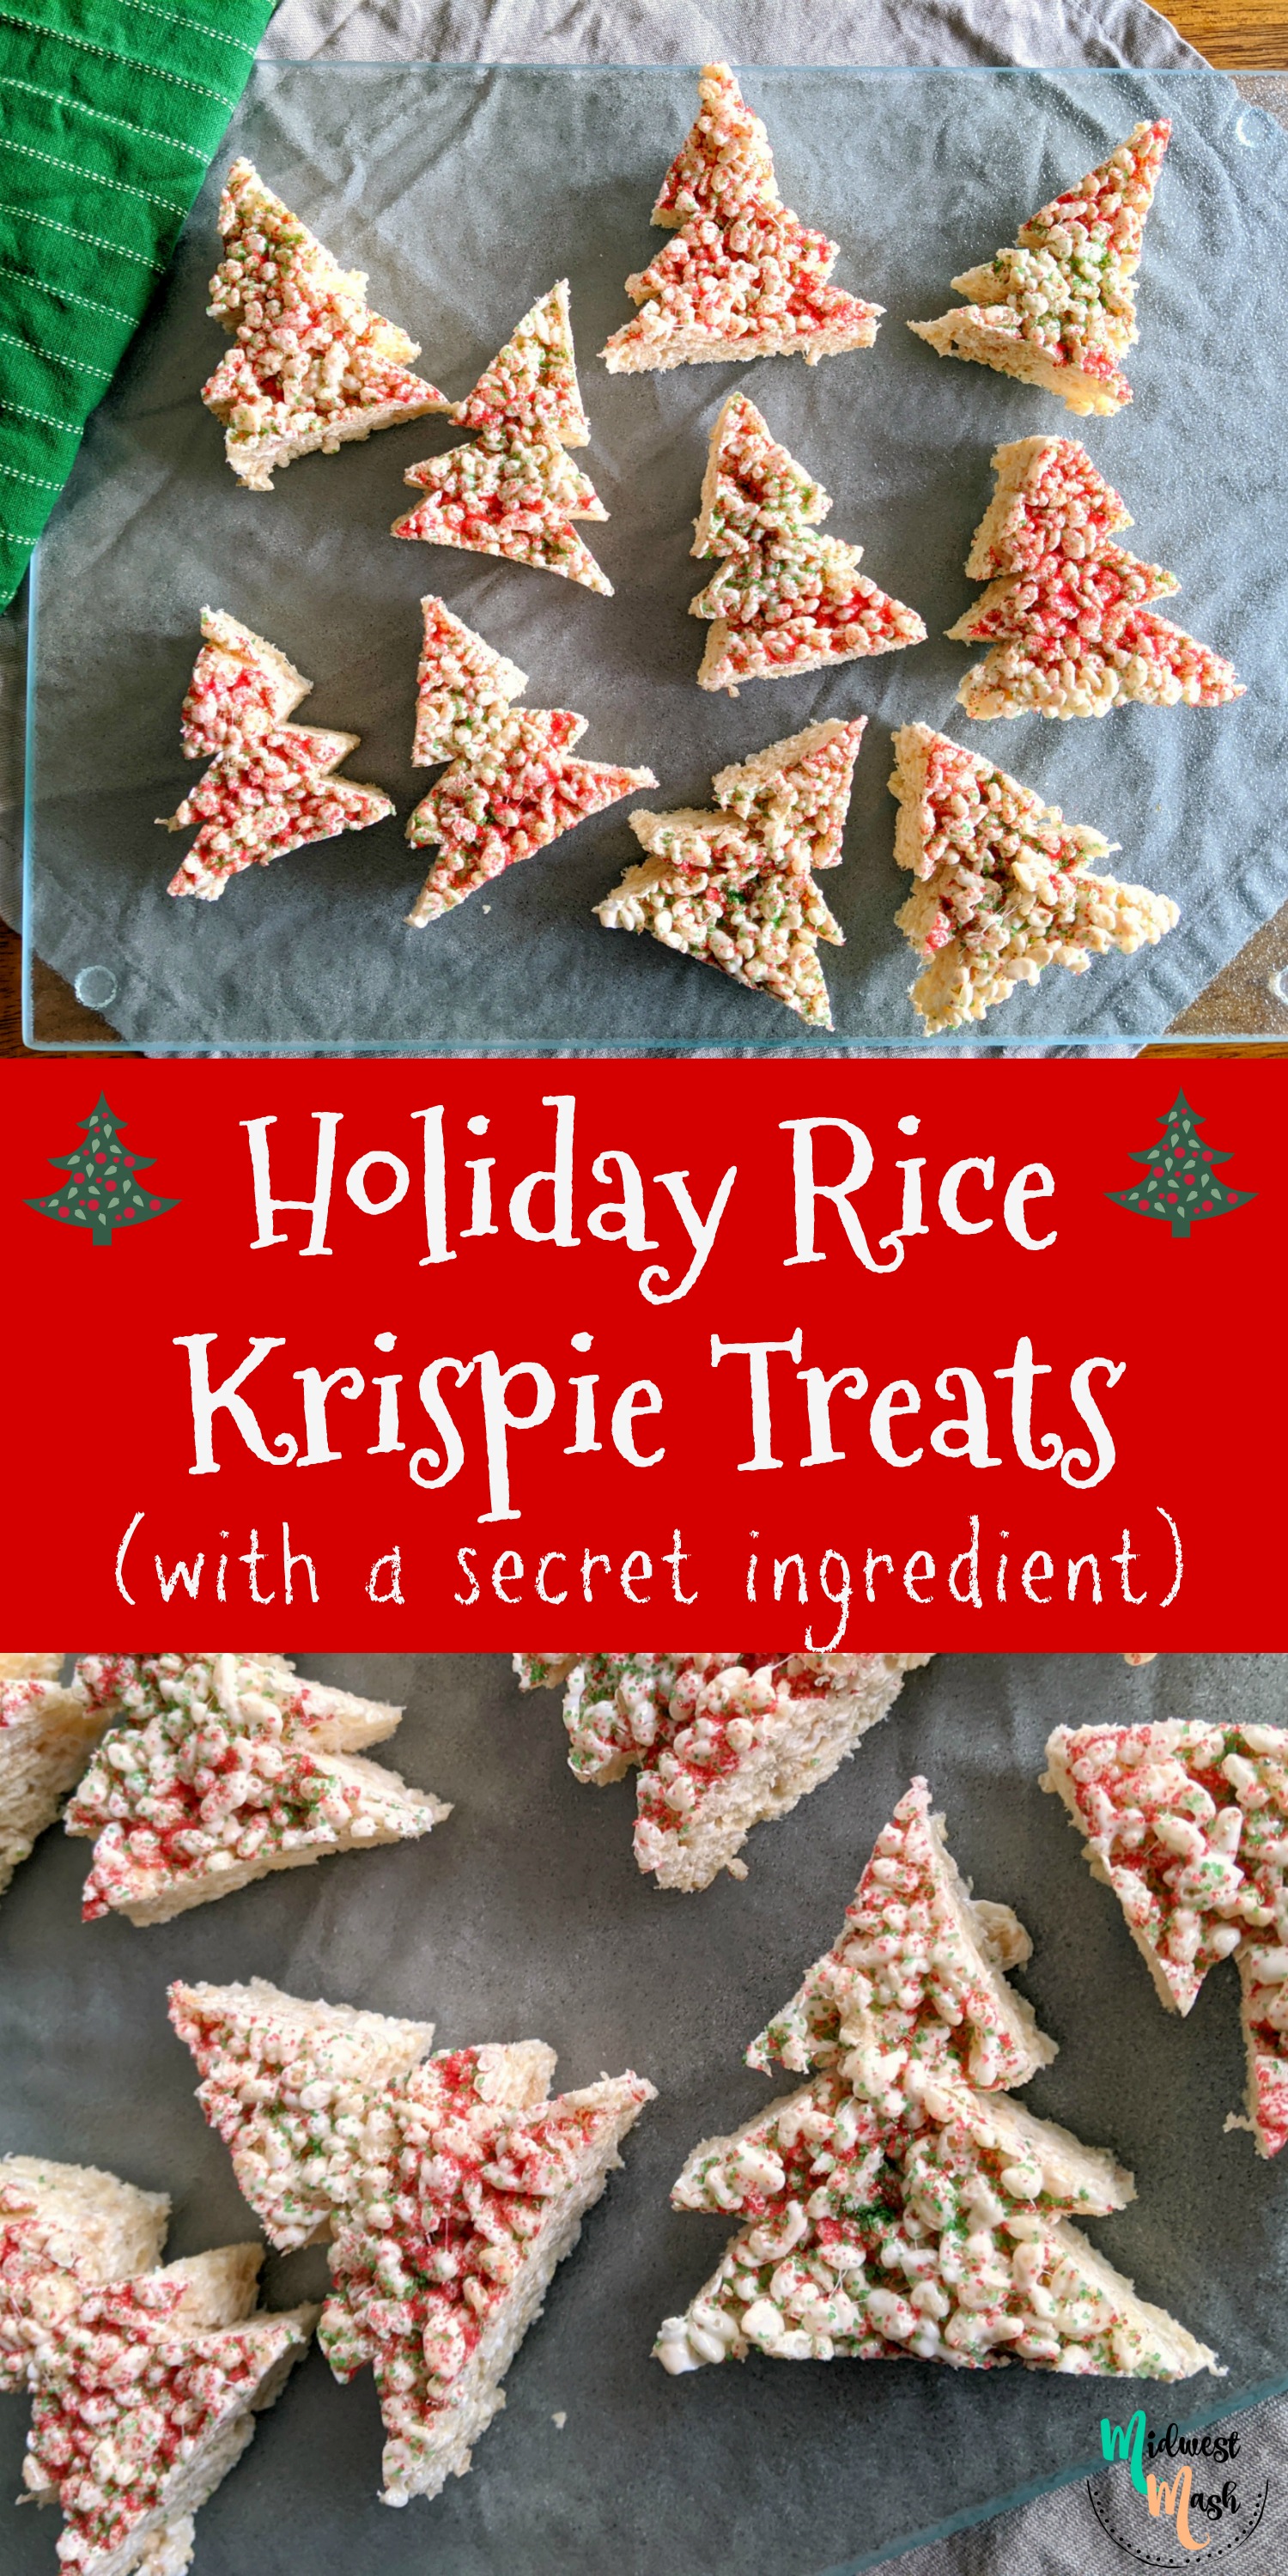 Holiday Rice Krispie Treats (with a Special Ingredient) | Midwest Mash